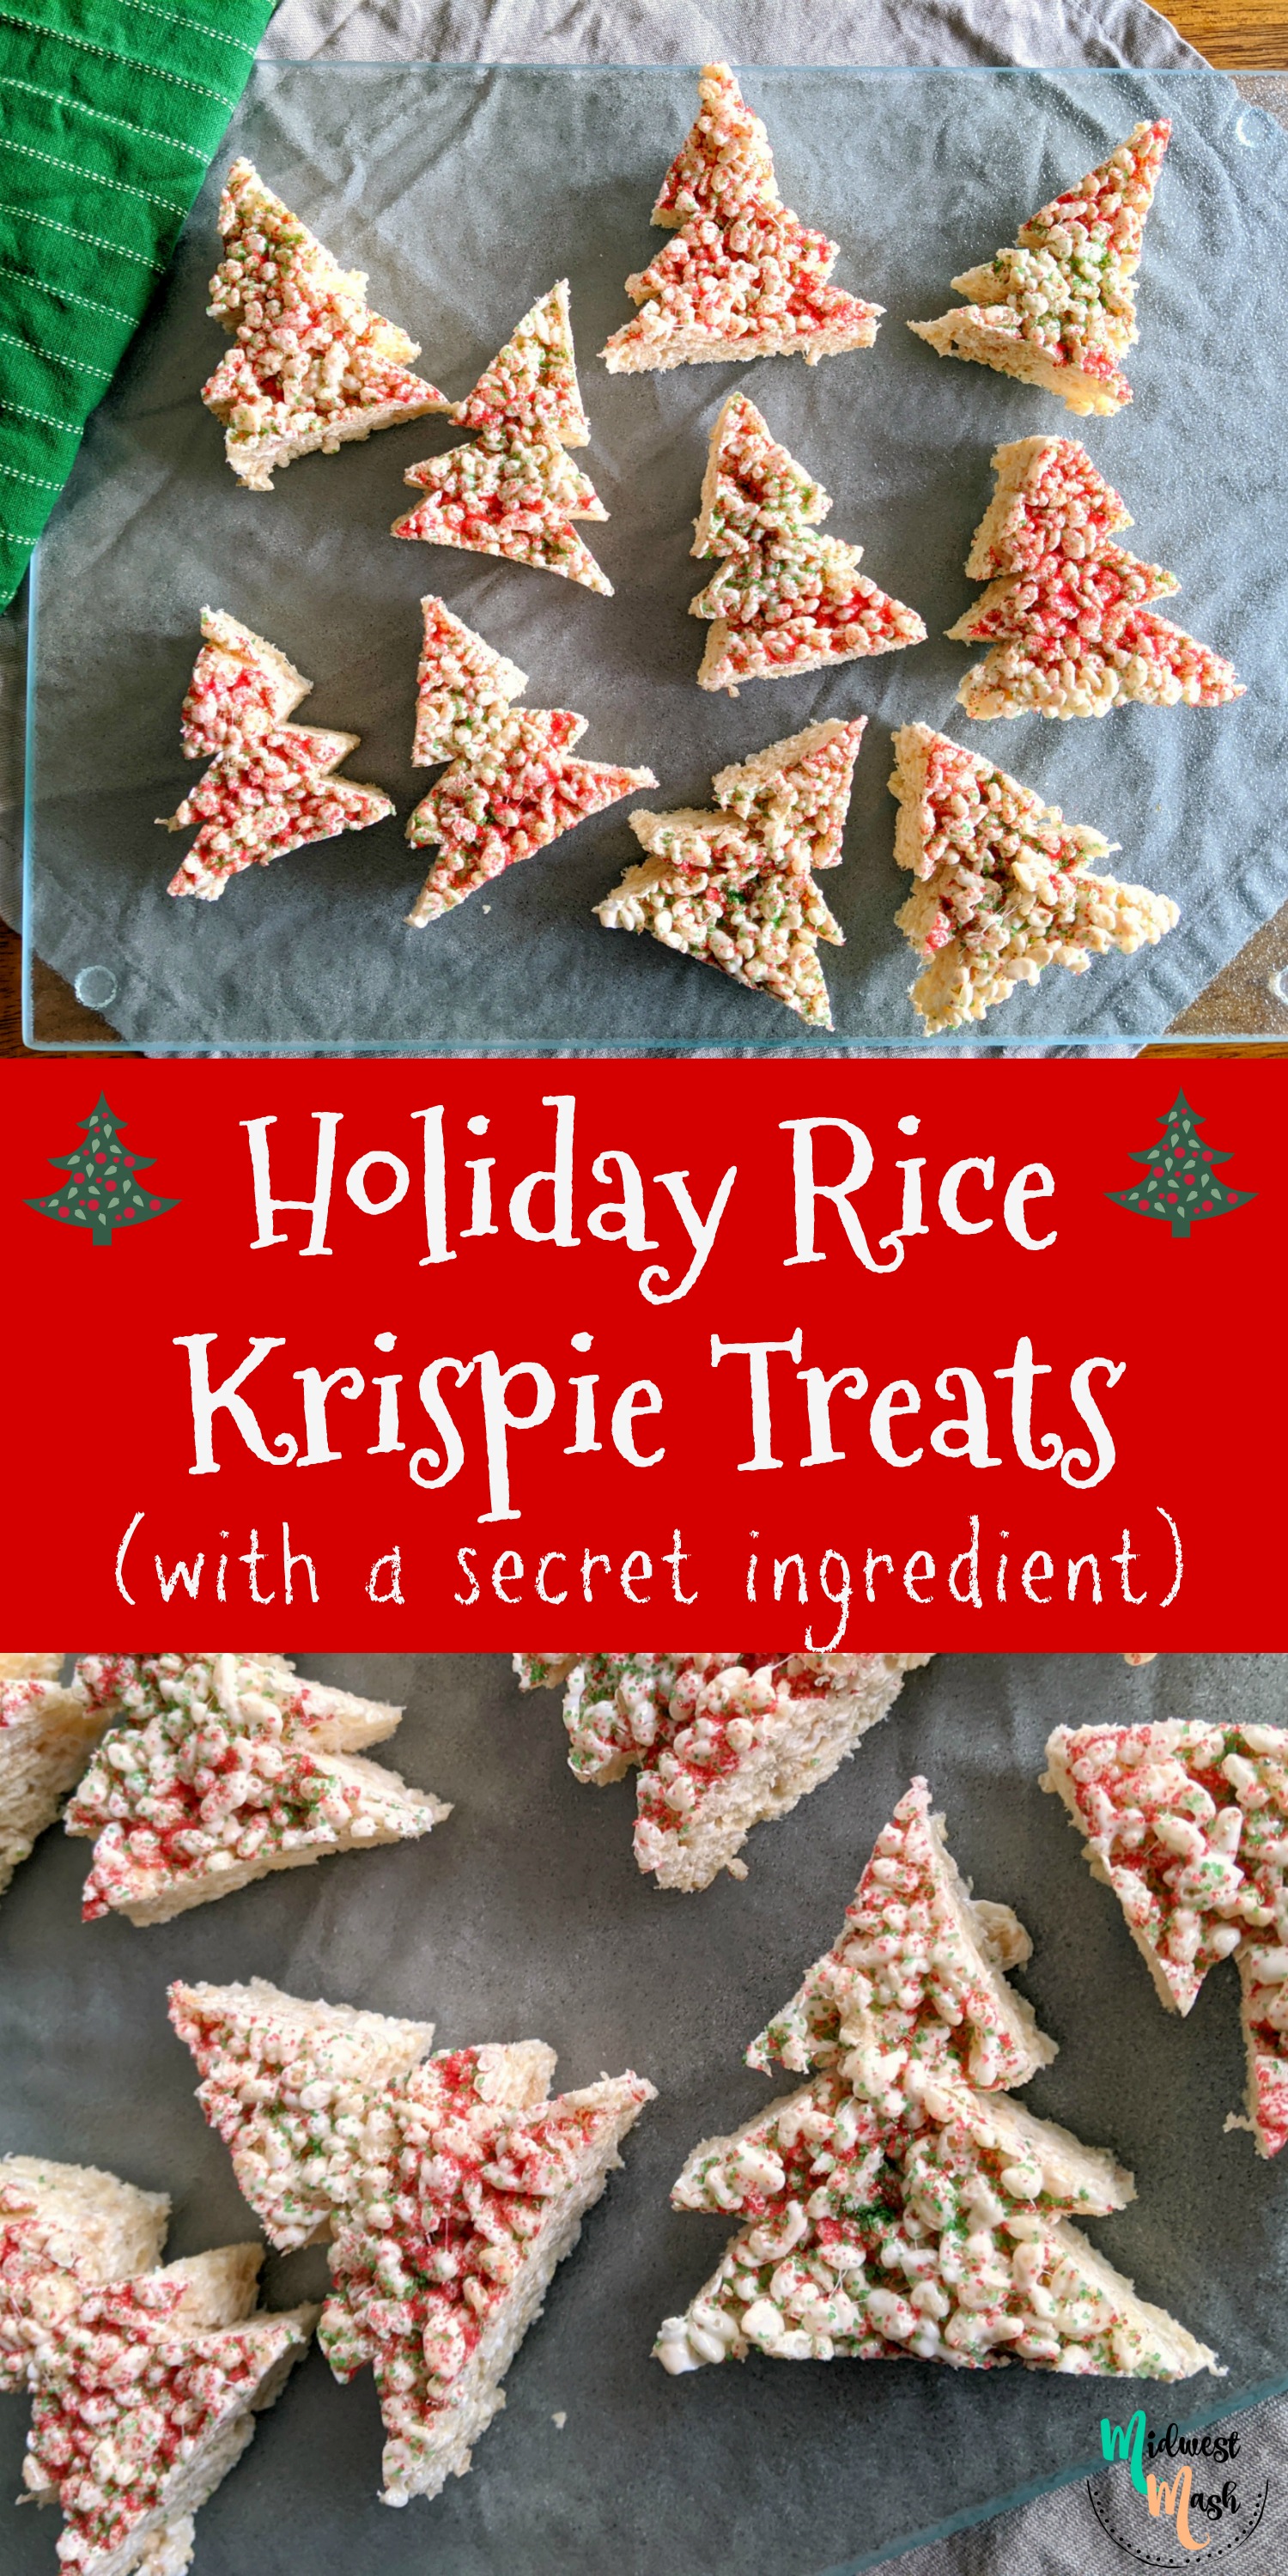 Holiday Rice Krispie Treats (with a Special Ingredient) | Midwest Mash